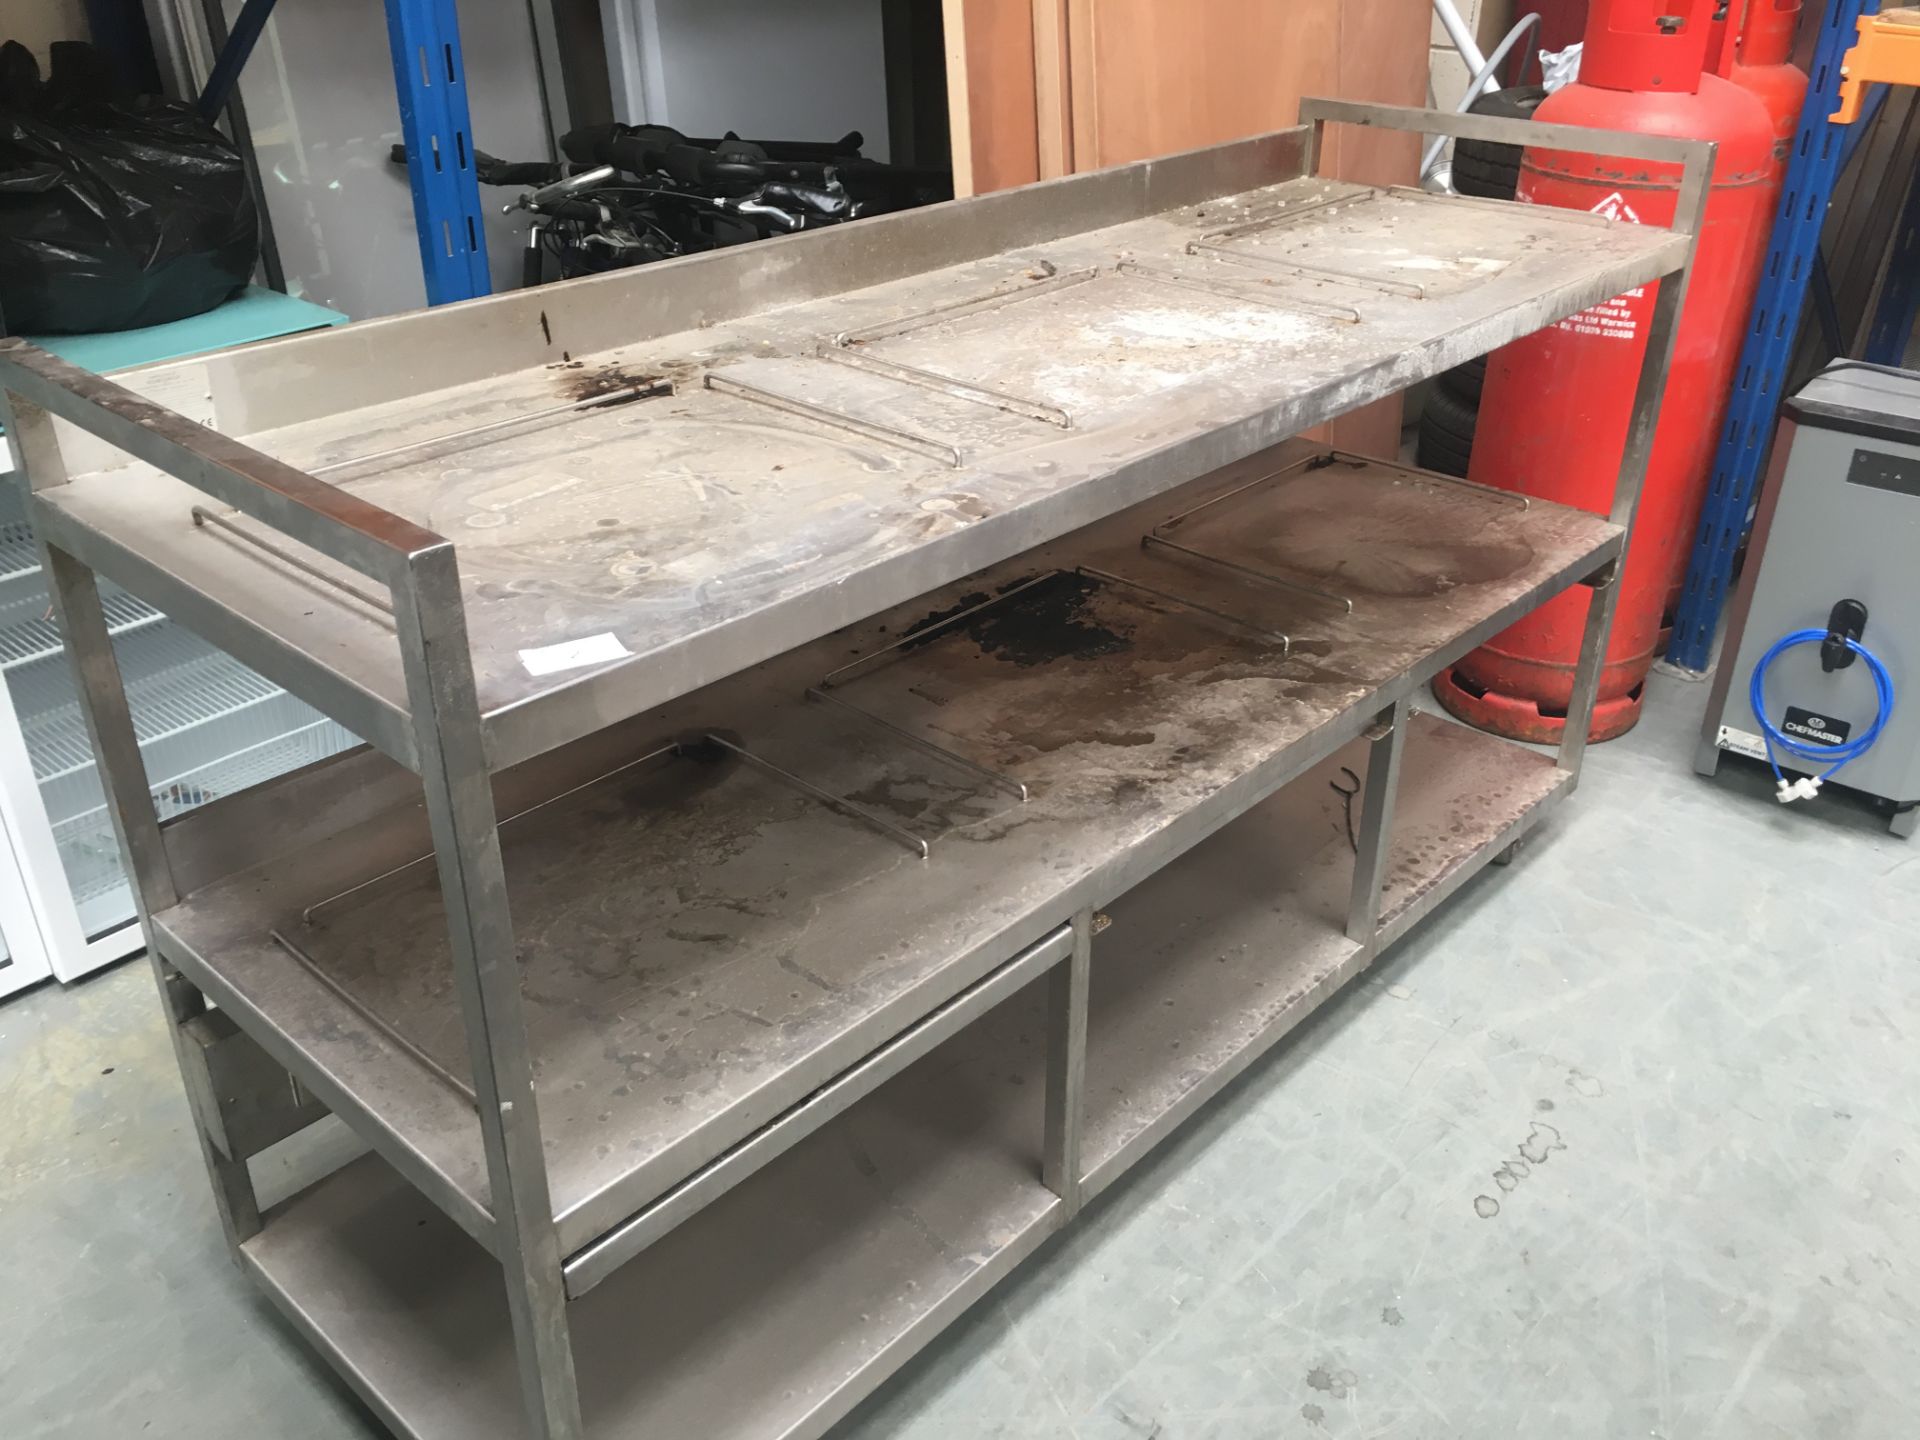 Stainless Steel Table with Electric Converter Box